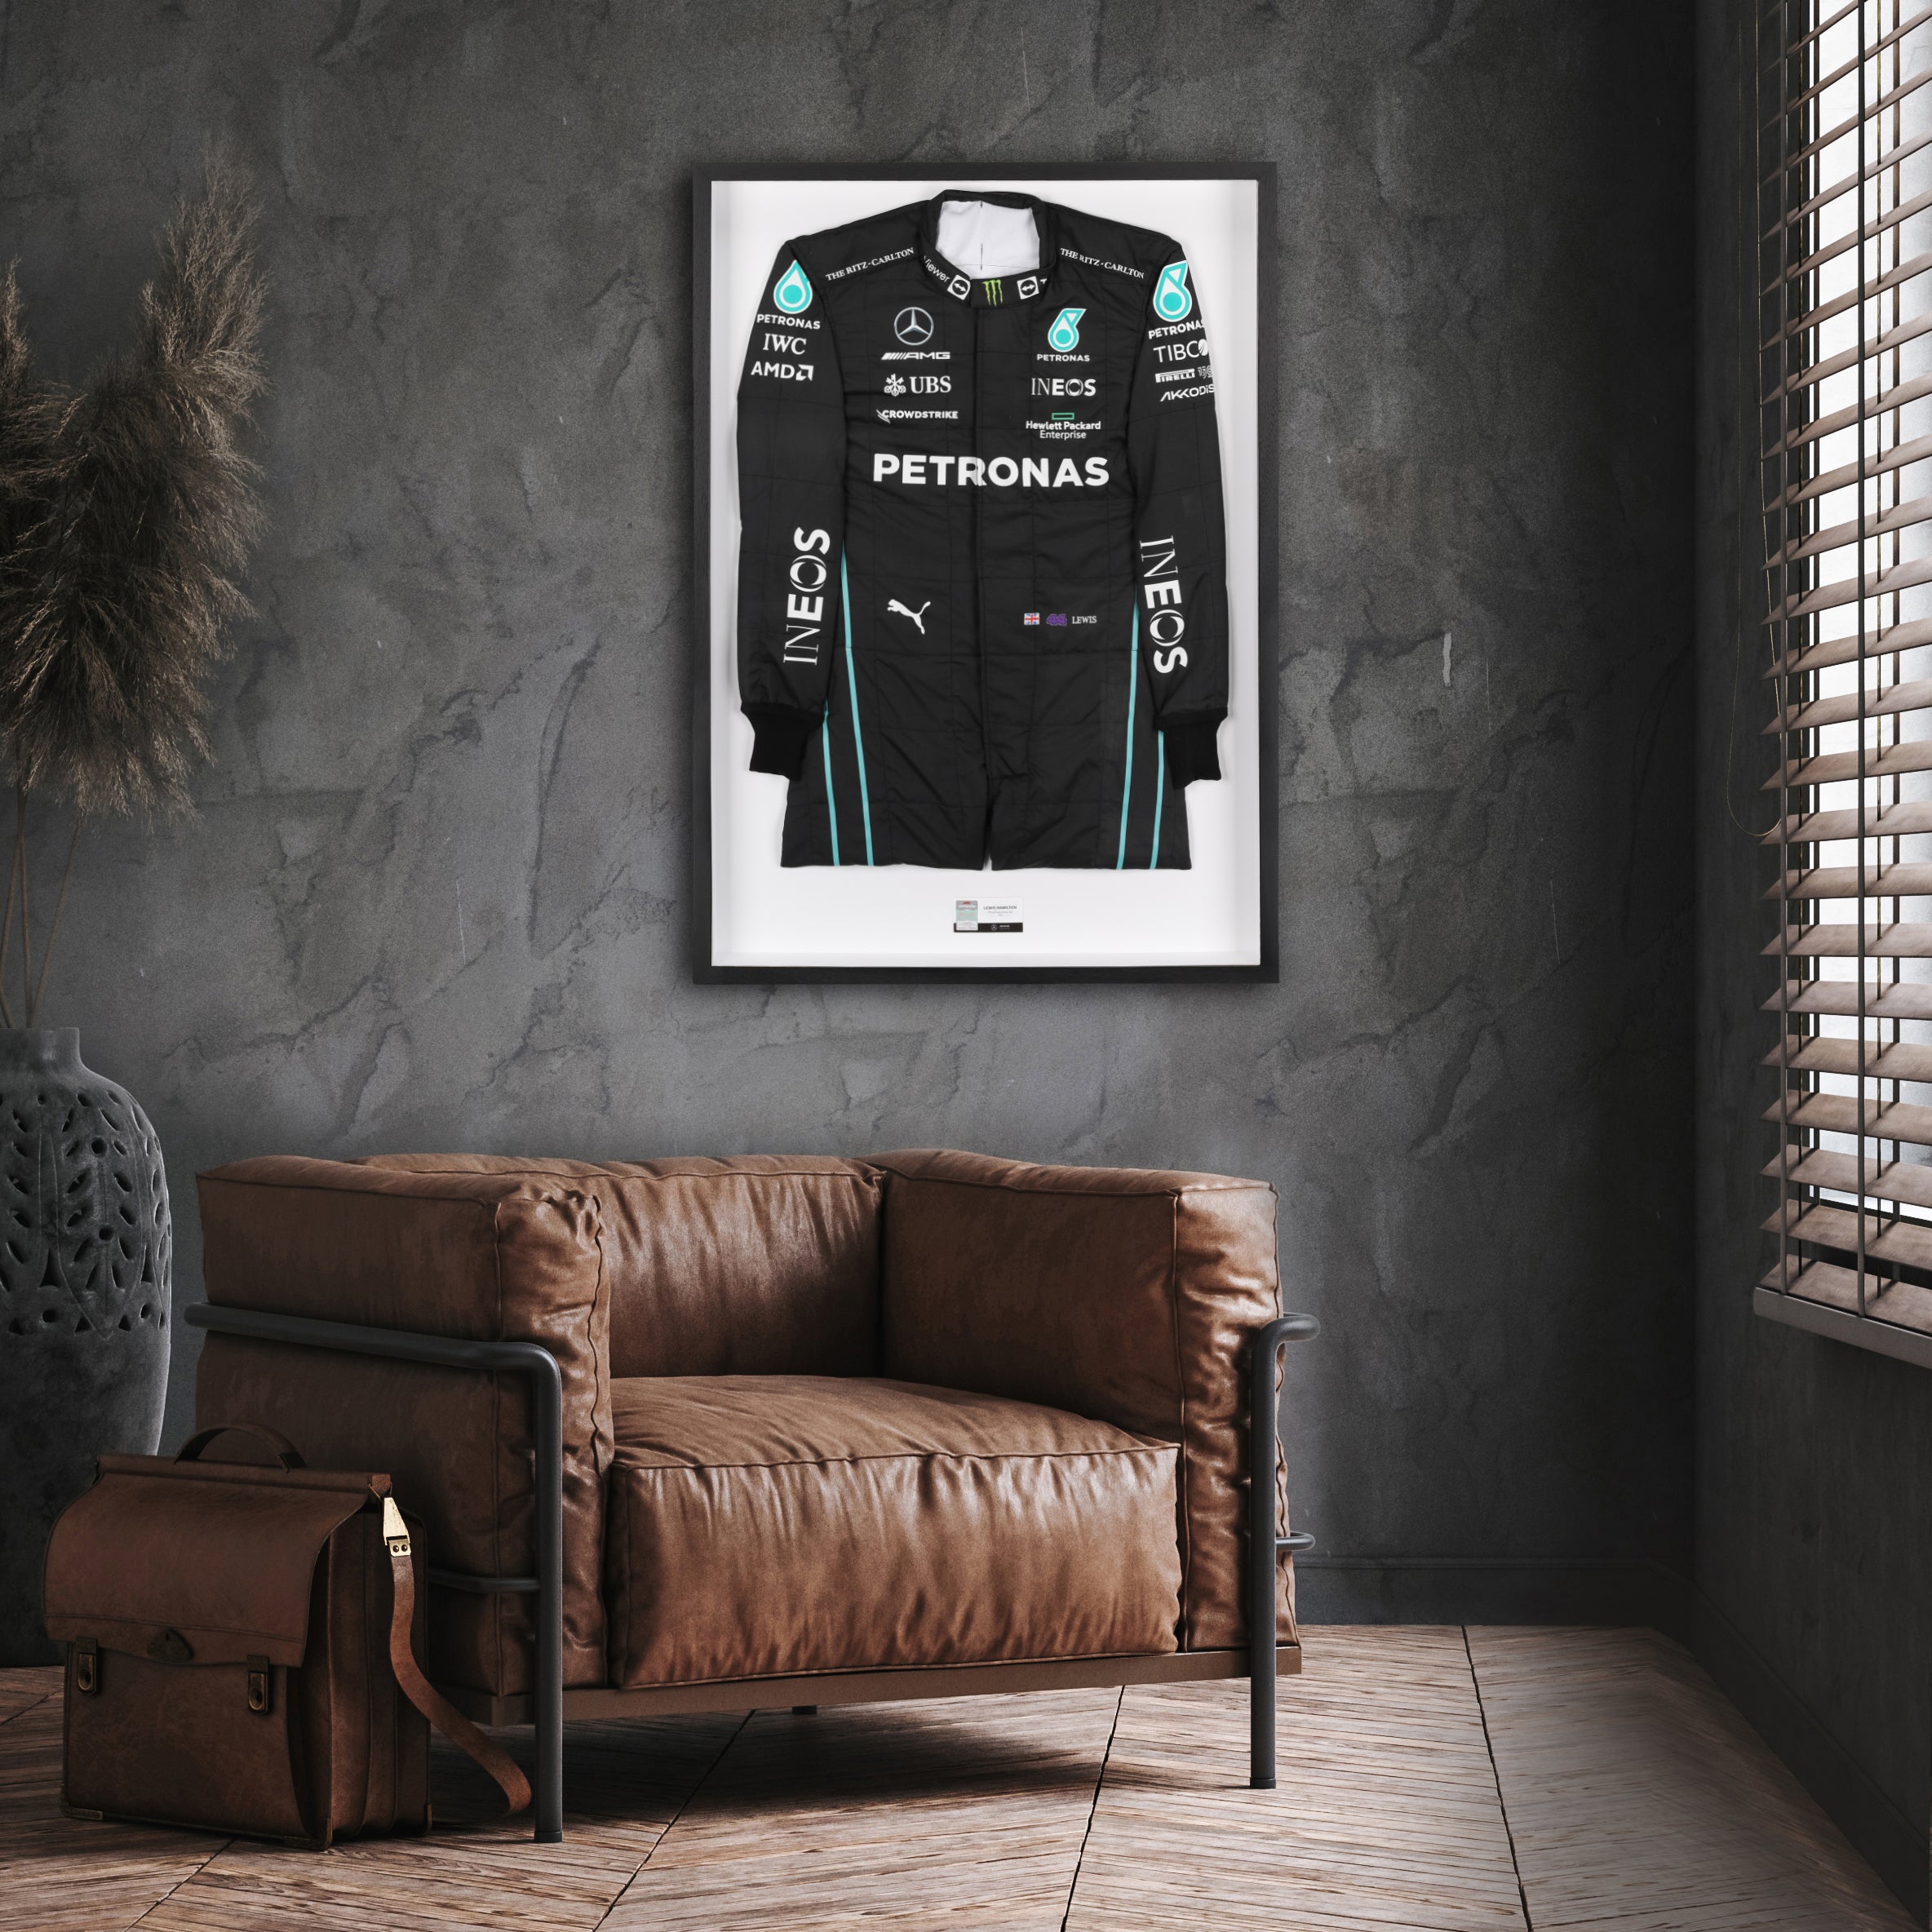 Officially Licensed 2022 Mercedes-AMG Petronas F1 Team Race Suit - Lewis Hamilton Edition